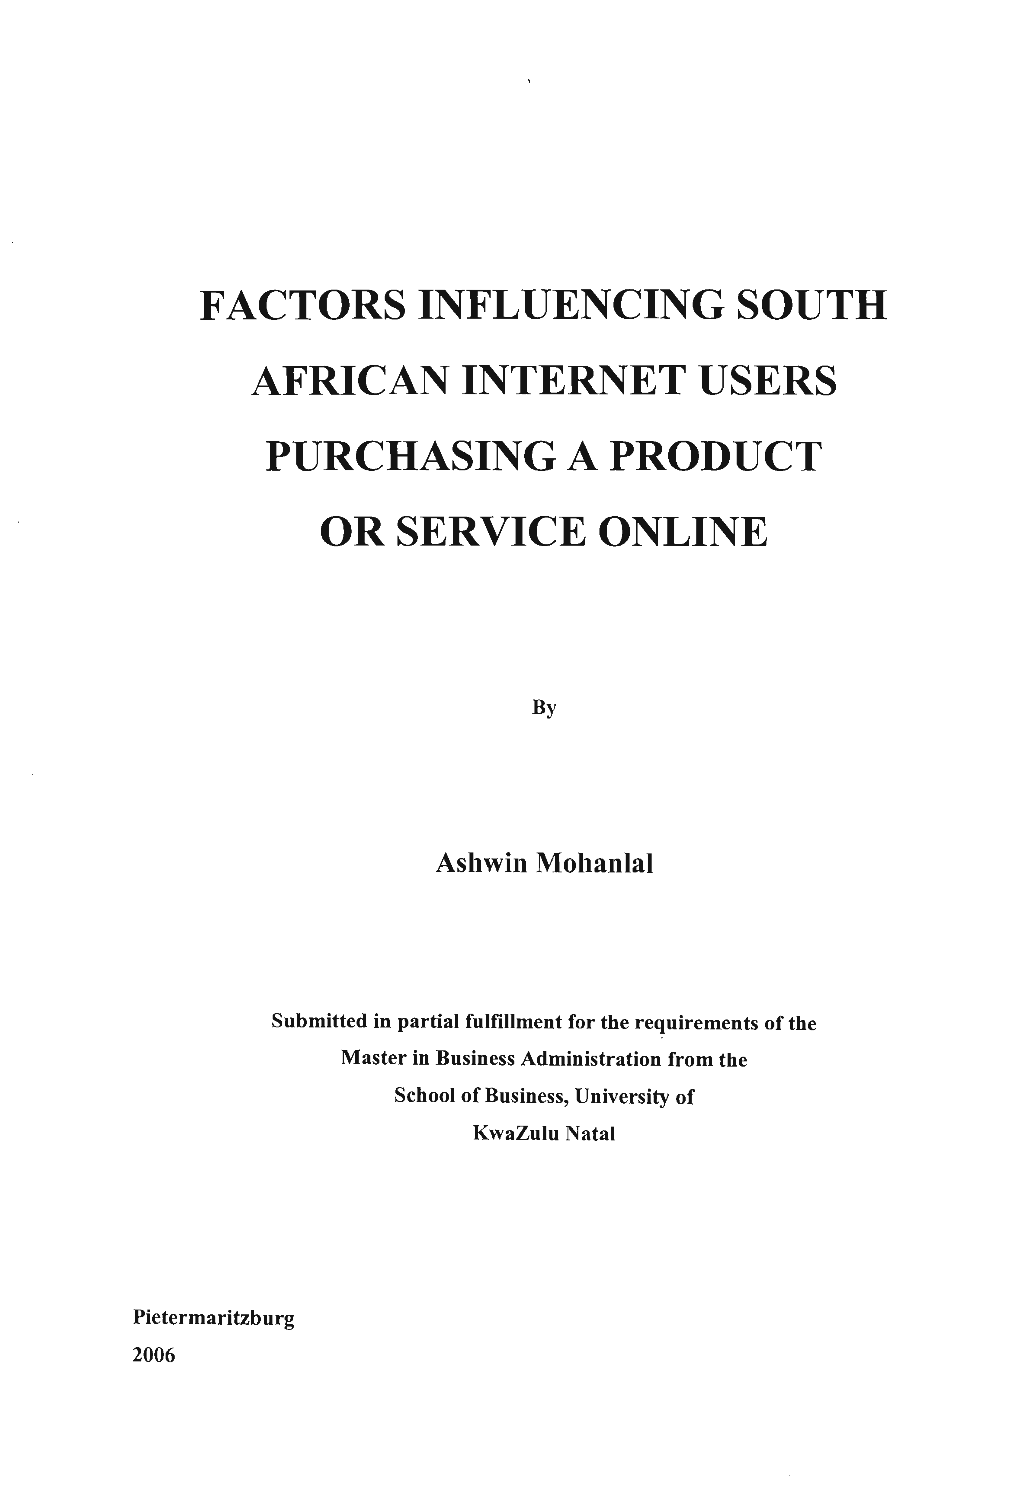 Factors Influencing South African Internet Users Purchasing a Product Or Service Online